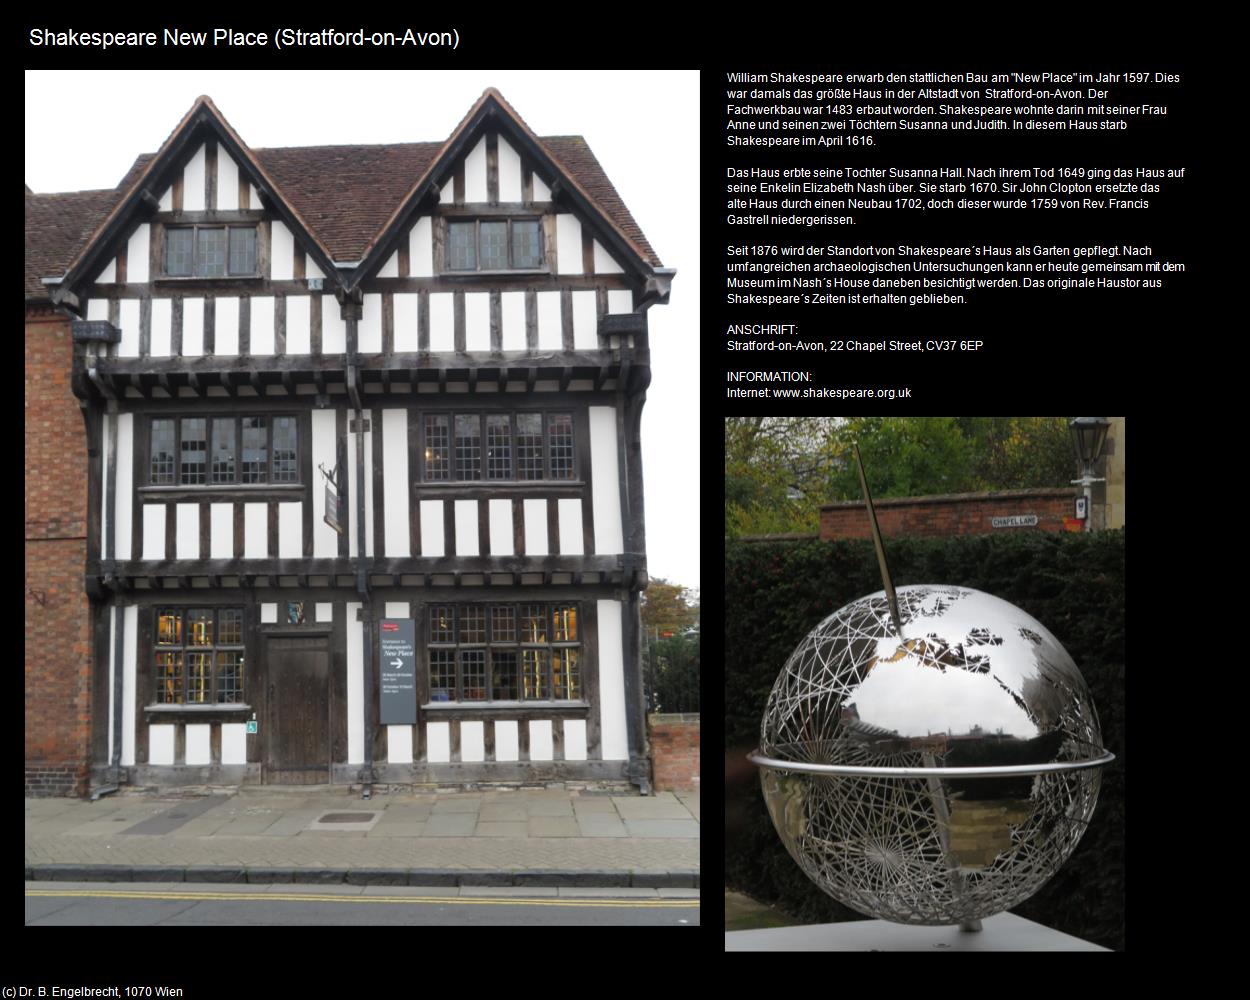 Shakespeare New Place (Stratford-on-Avon, England) in Kulturatlas-ENGLAND und WALES